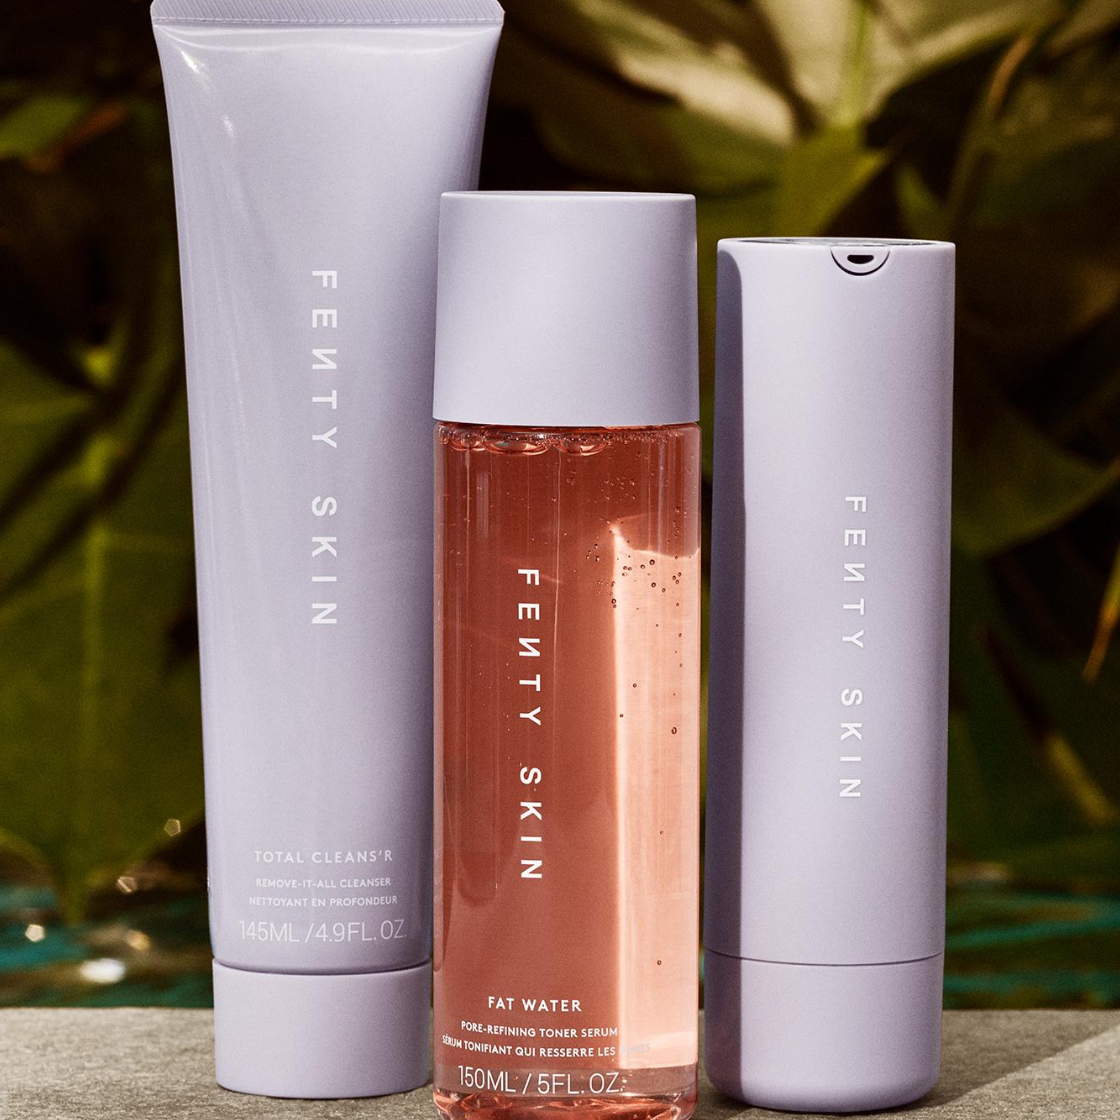 Fenty Beauty's latest product combines skincare and makeup